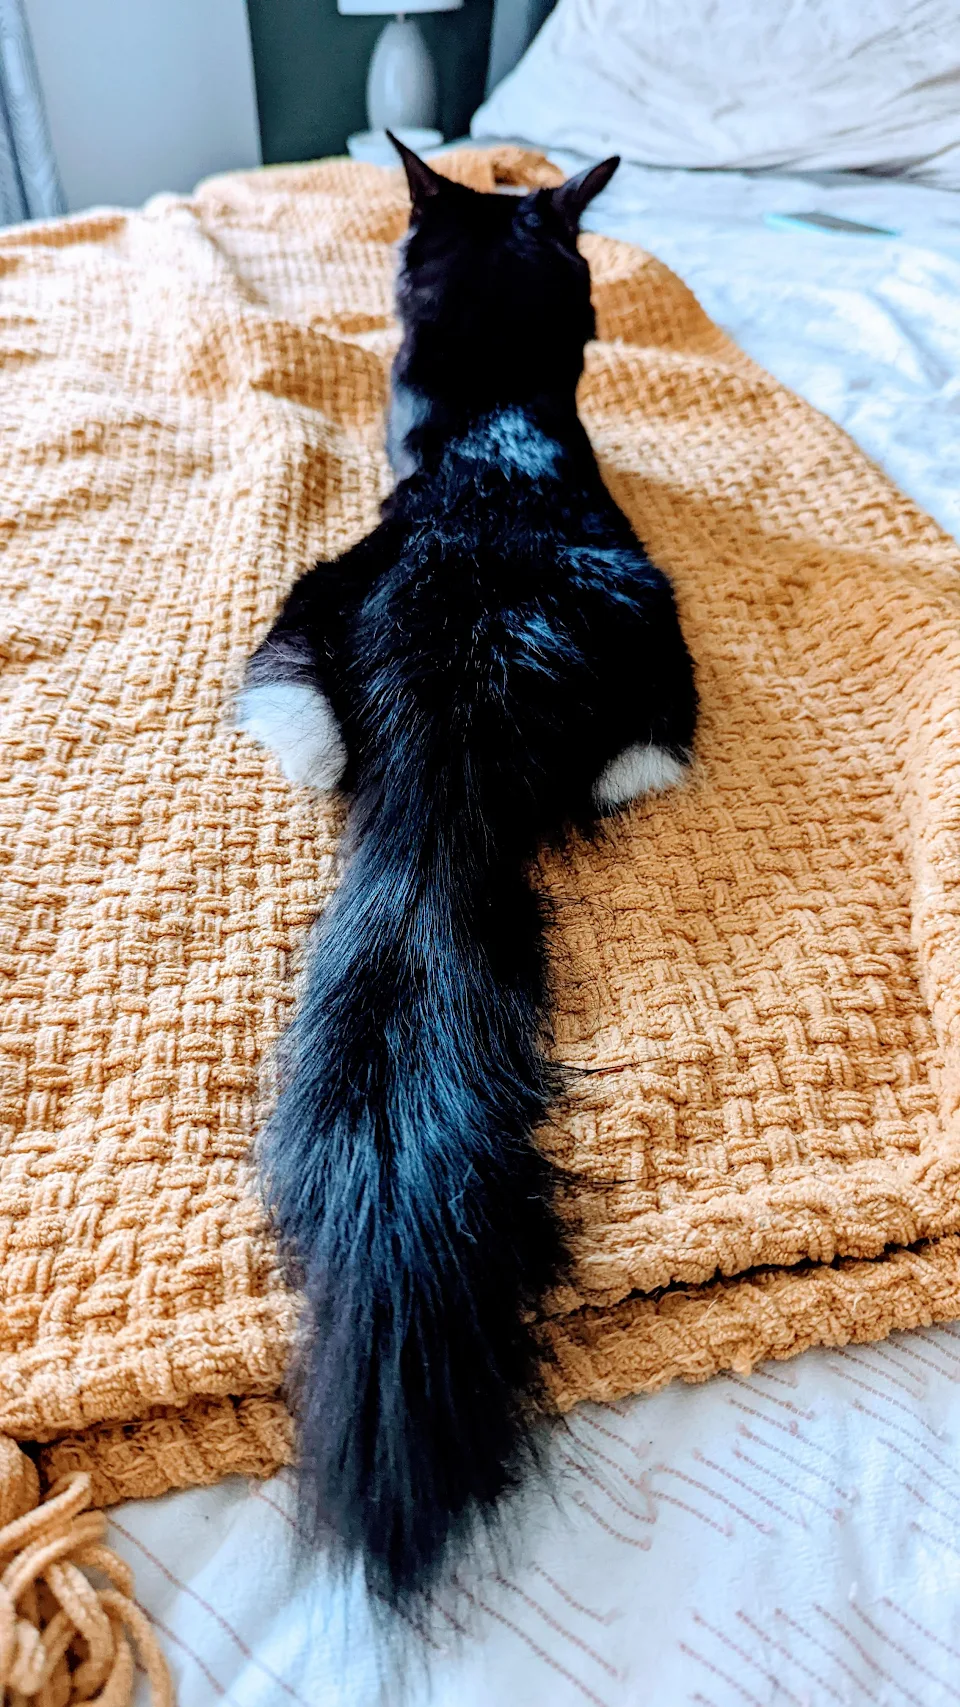 Our new kitten with a fluffy tail